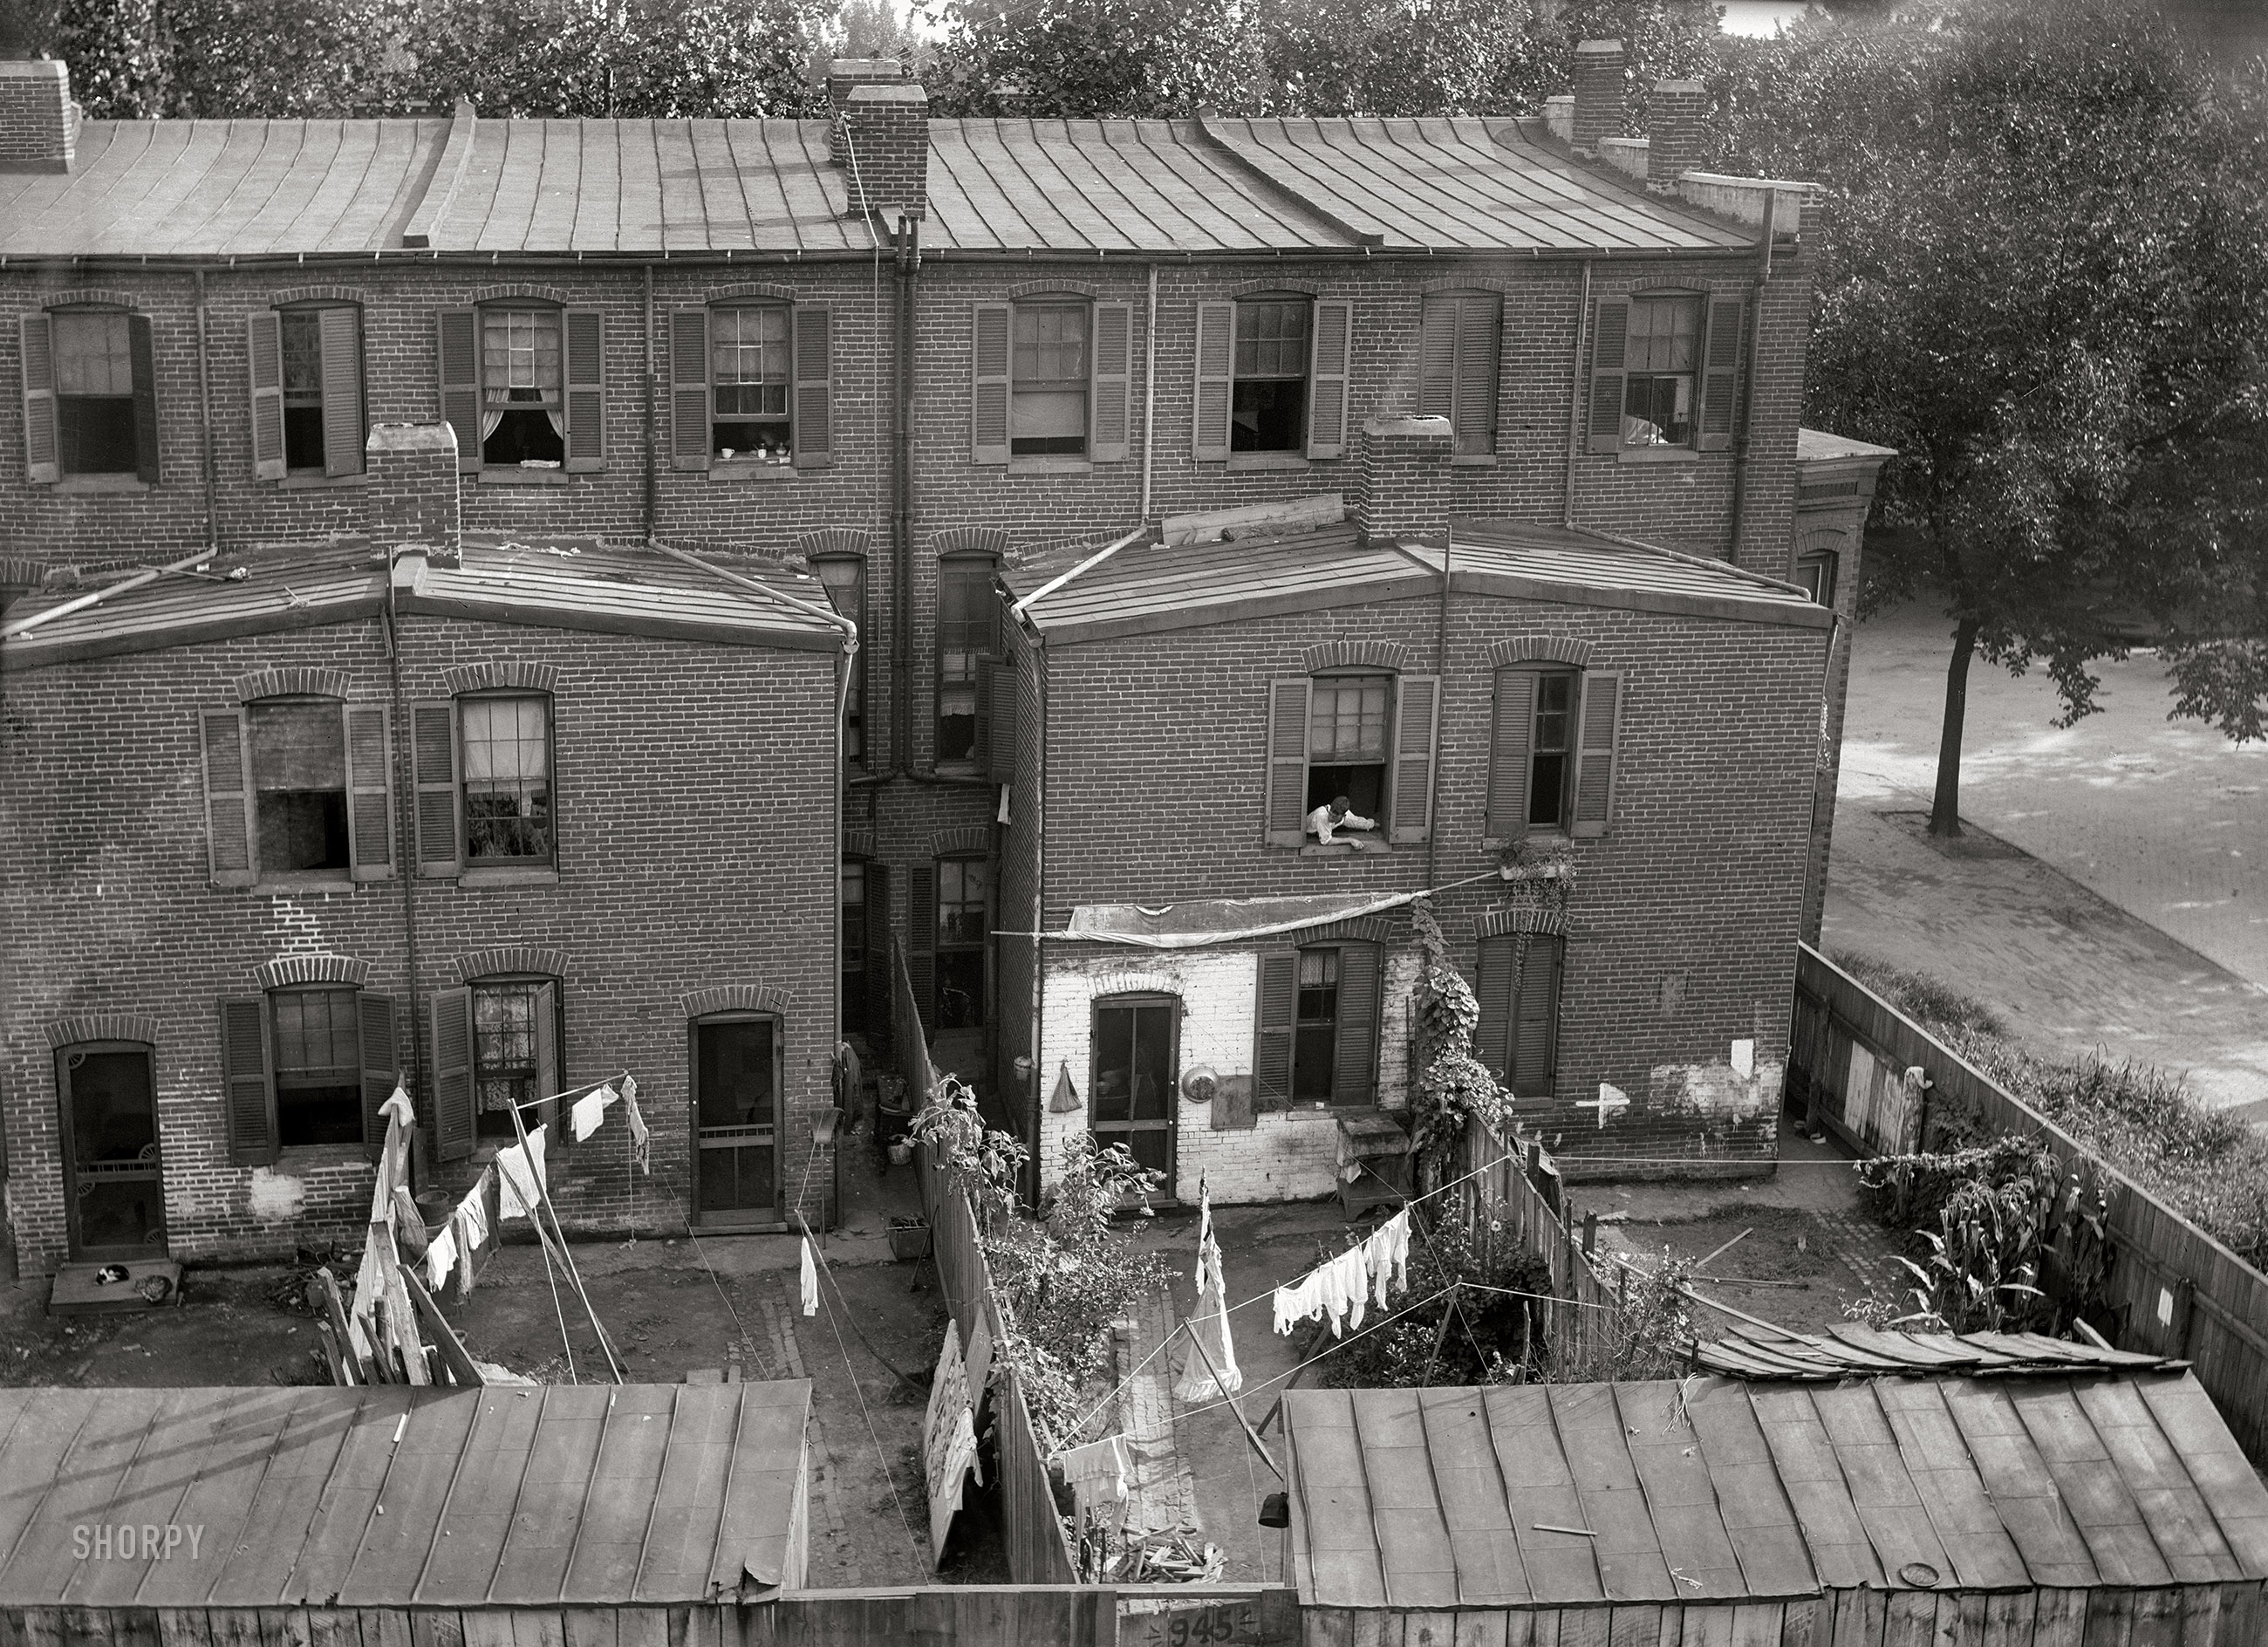 Washington, D.C., circa 1901. "An elevated view of rowhouses, probably in S.W., showing laundry hanging on clotheslines in back yards." Also Mr. Upstairs keeping an eye on Miss Downstairs. 5x7 inch glass negative, D.C. Street Survey Collection. View full size.